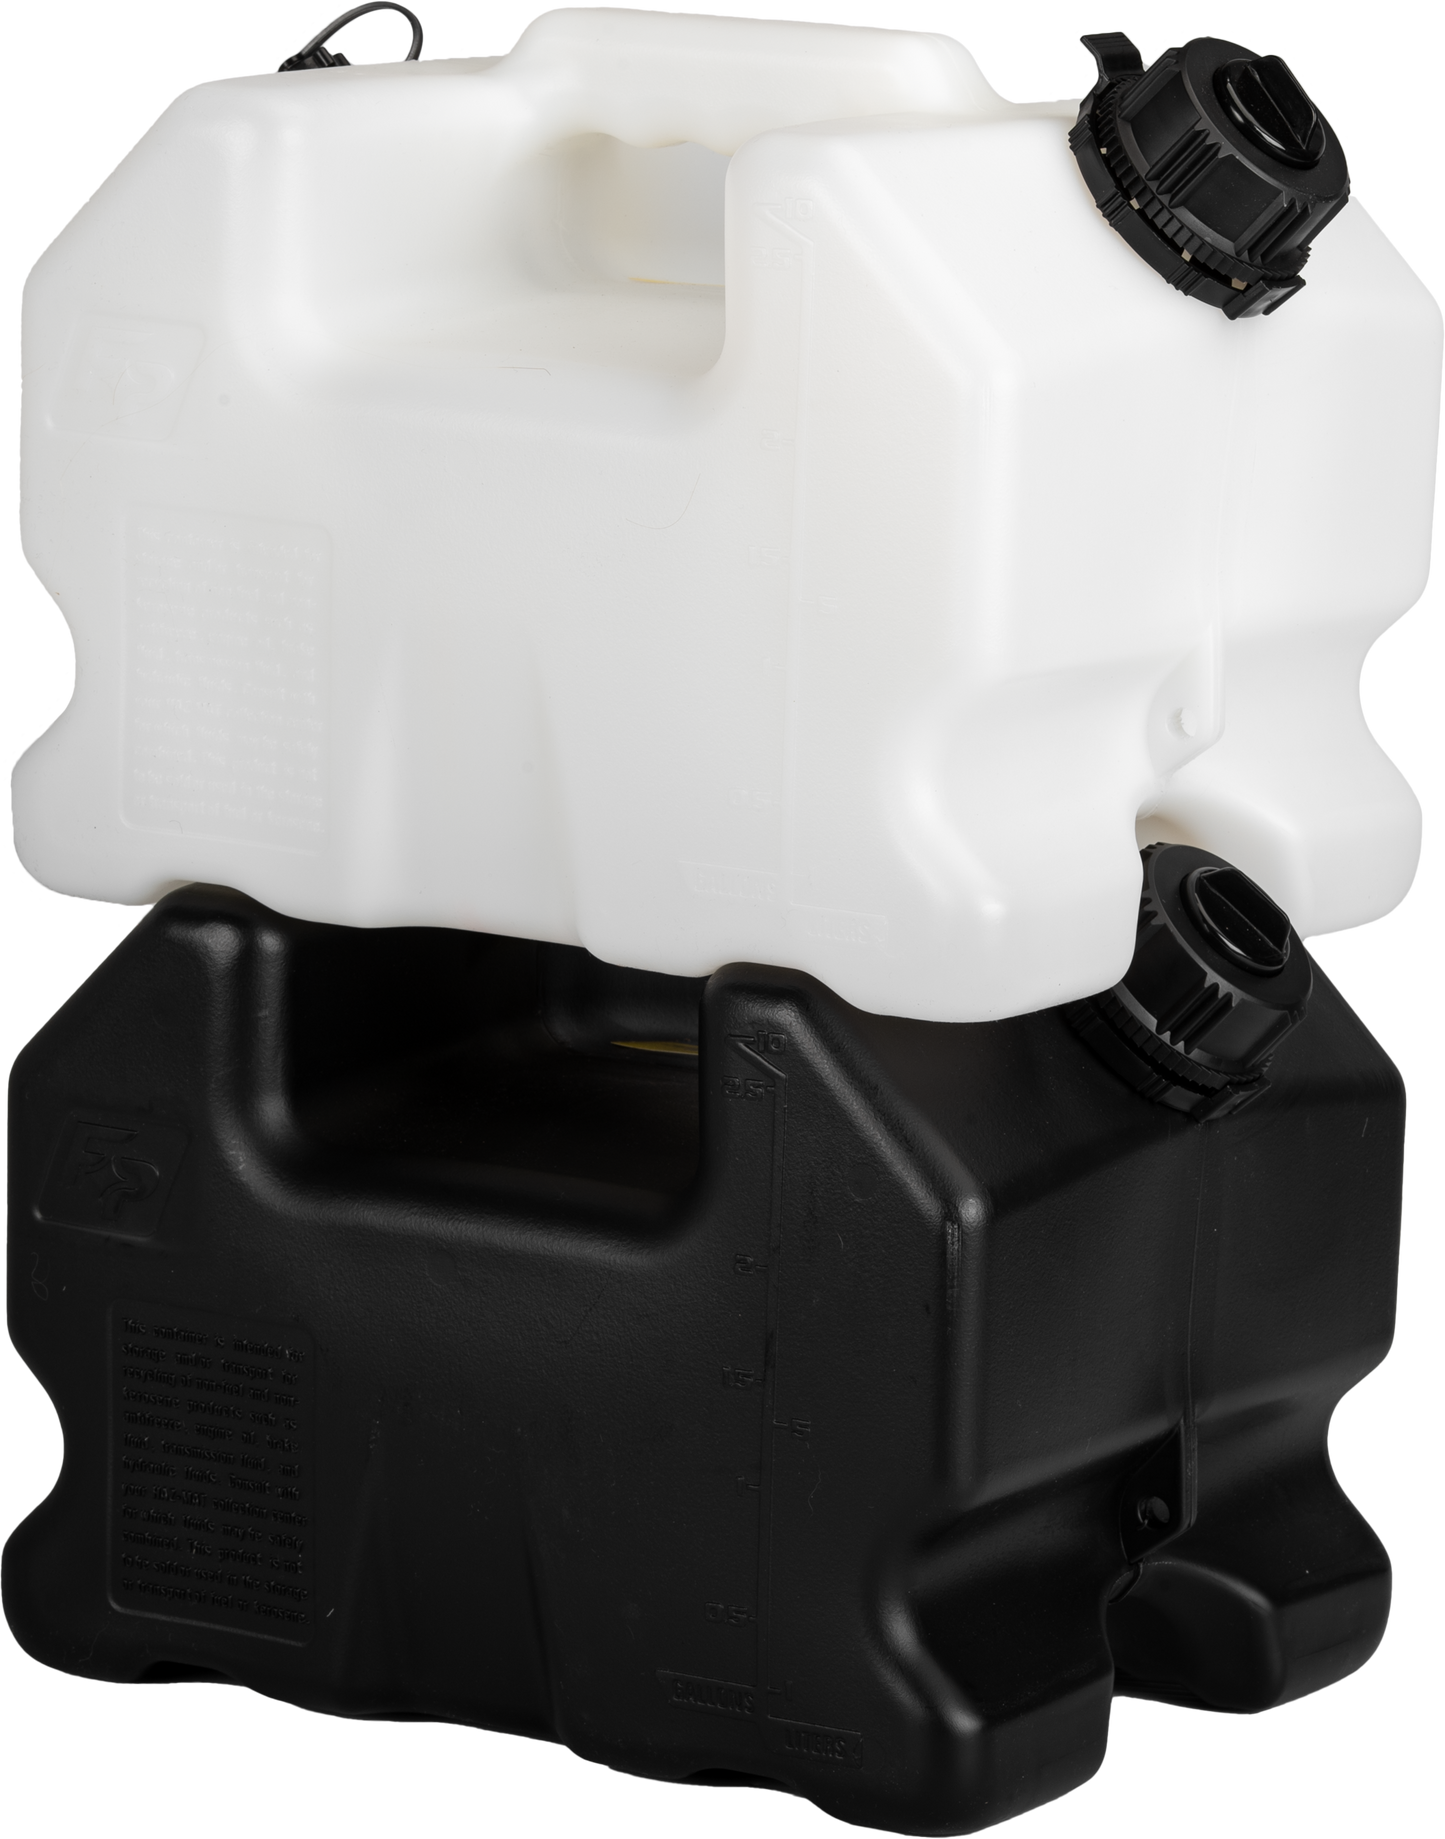 Fire Power Stackable Fuel Container 2.5 Gallon White